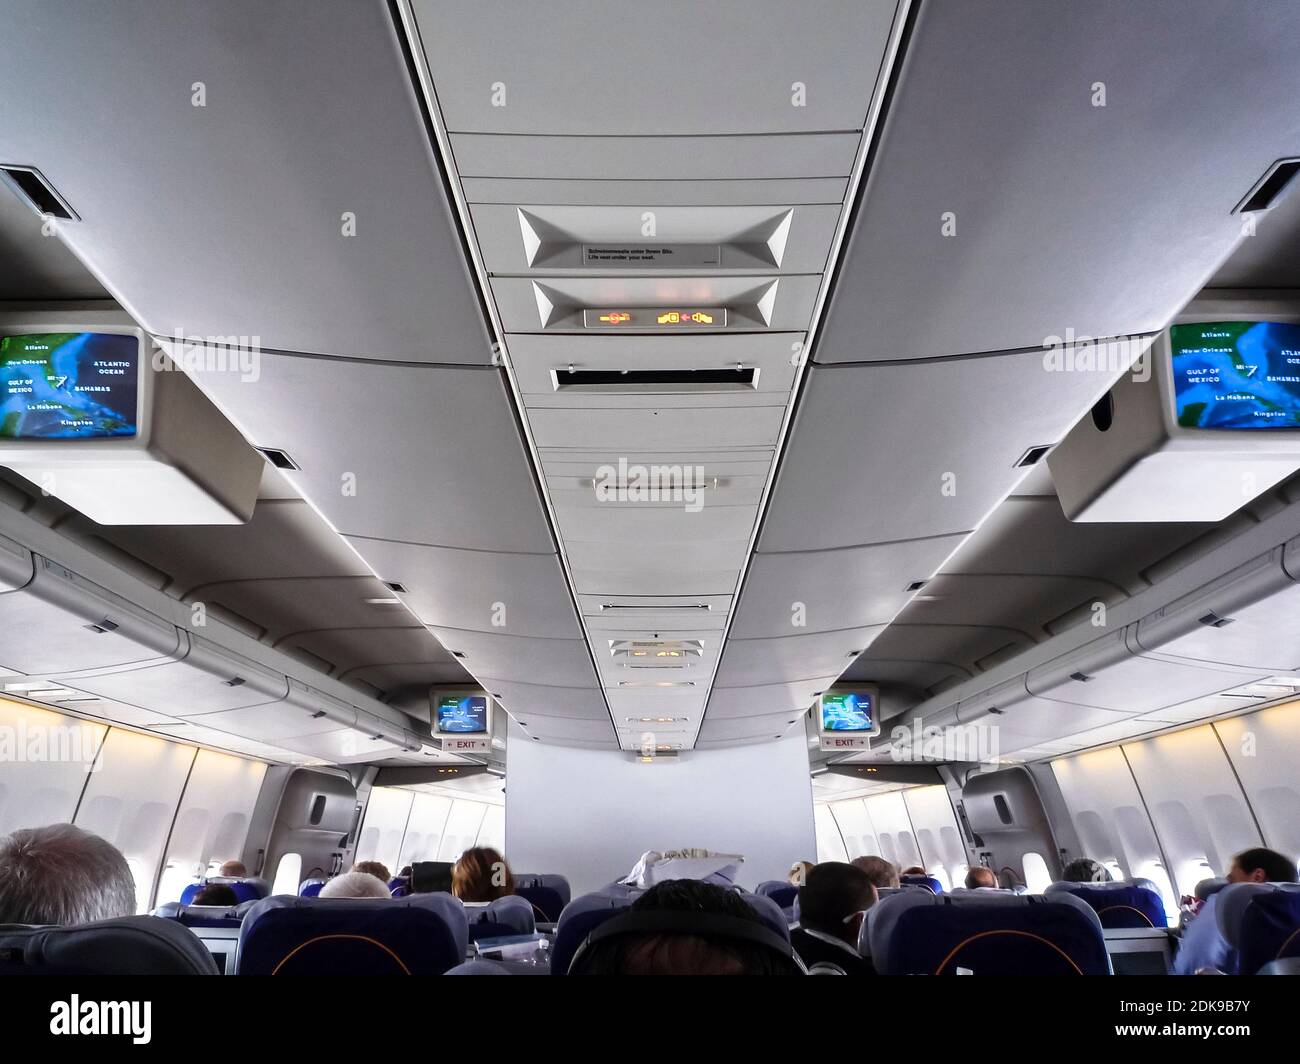 Boeing 747 Business Class Section, Interior, Stock Photo